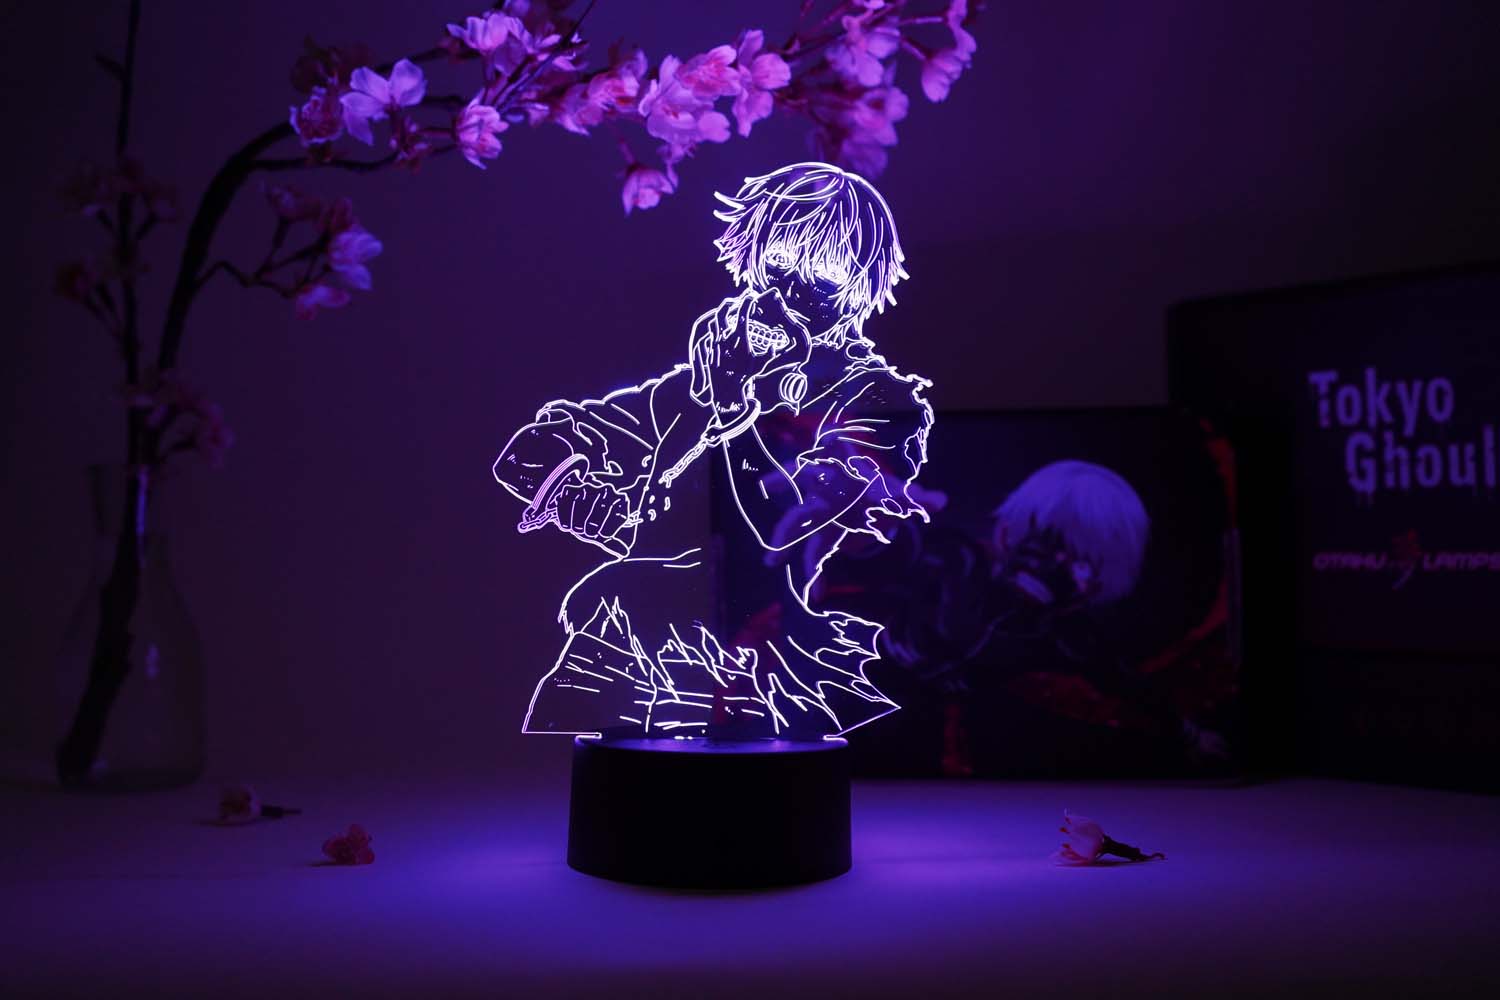 Violet evergarden anime drawing with light effect // sketch drawings |  Violet evergarden anime, Anime drawings, Drawings